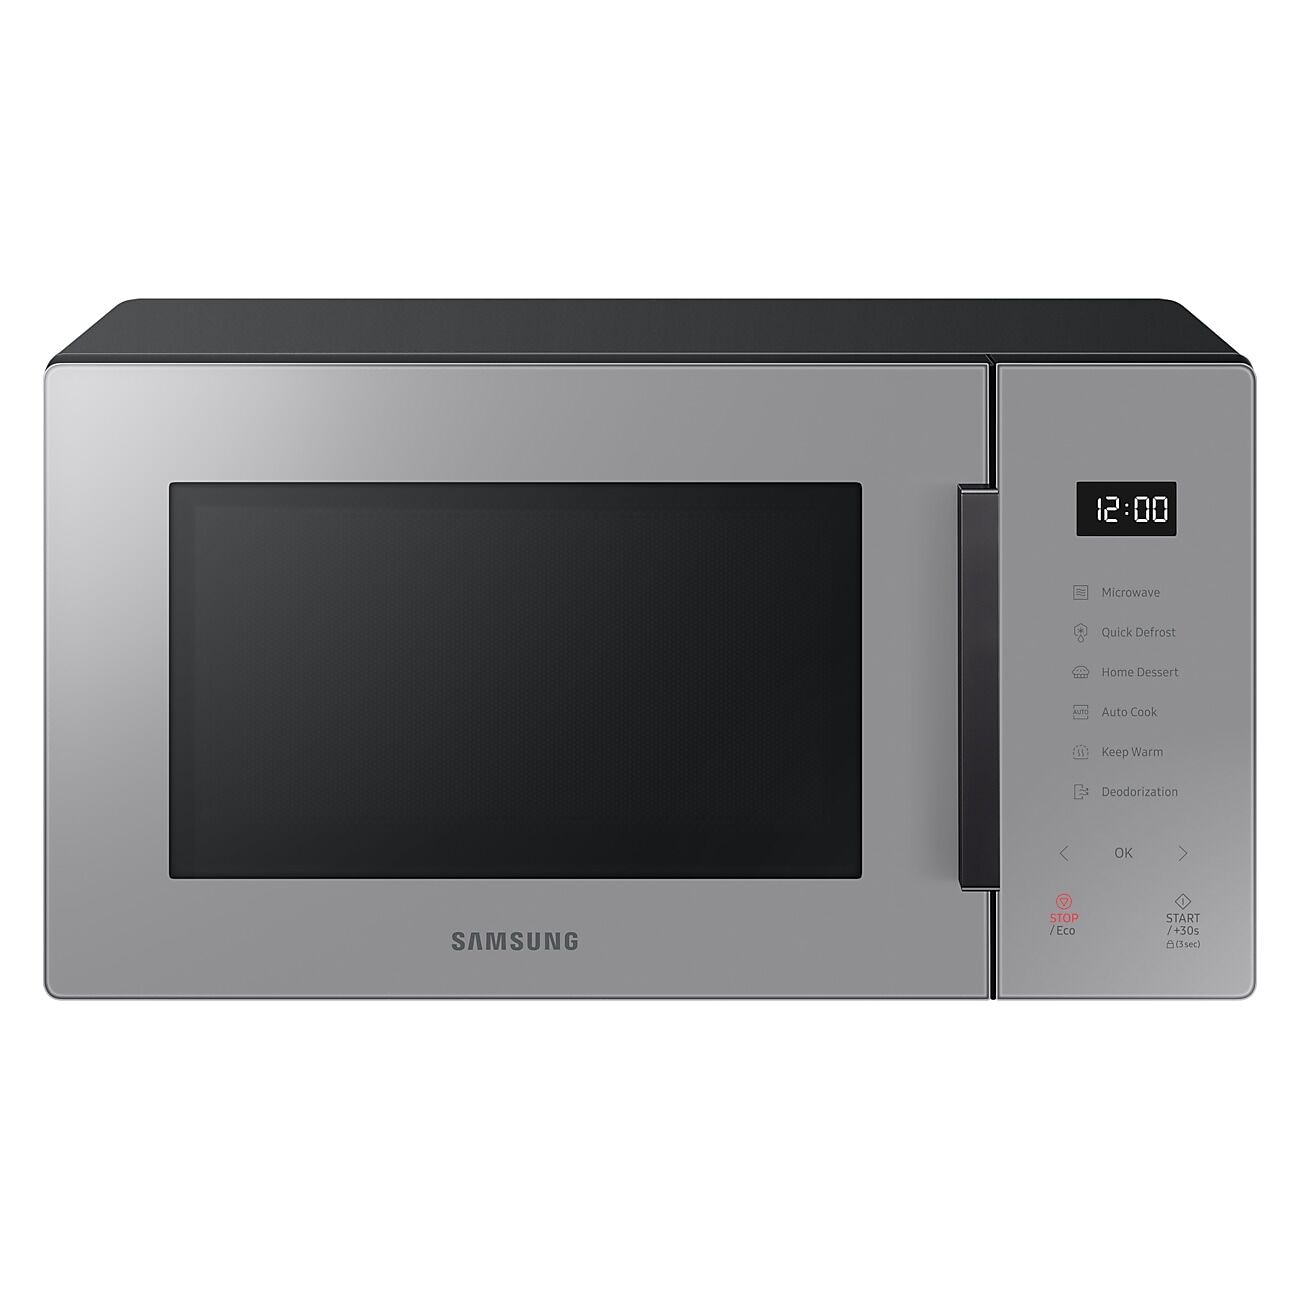 Samsung Glass Front 23 Litre Solo Microwave - Slate Gray in Grey (MS23T5018AG/EU)